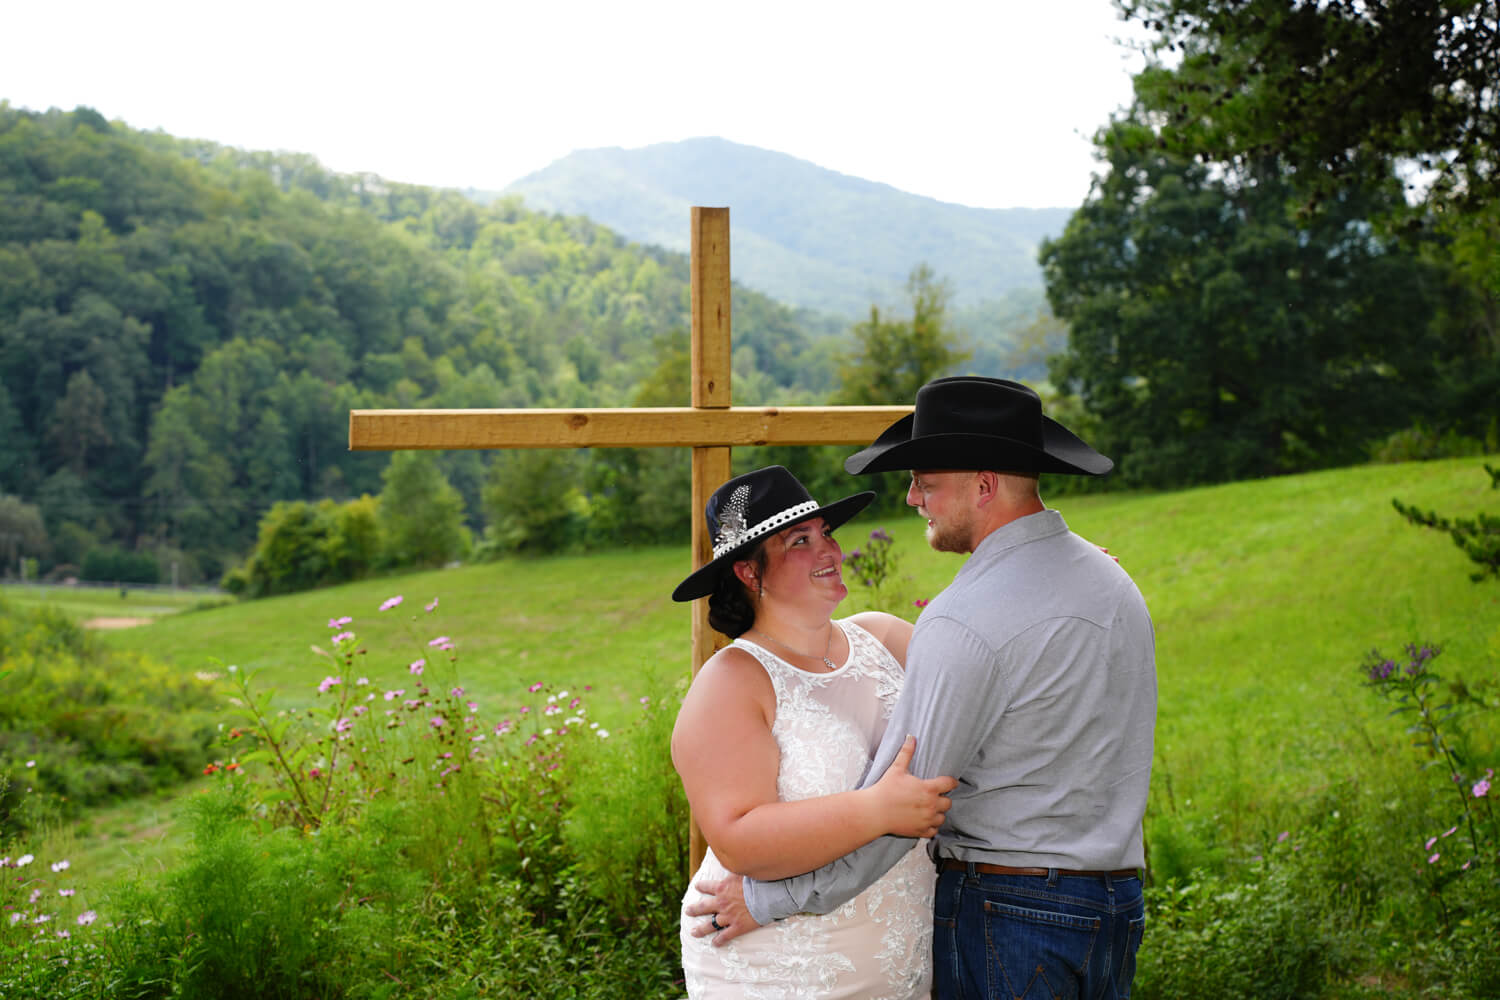 Western wedding couple with black cowboy hats posing for a picture at a wooden cross in a meadow with a mountain ridge view in Pigeon Forge, Tennessee